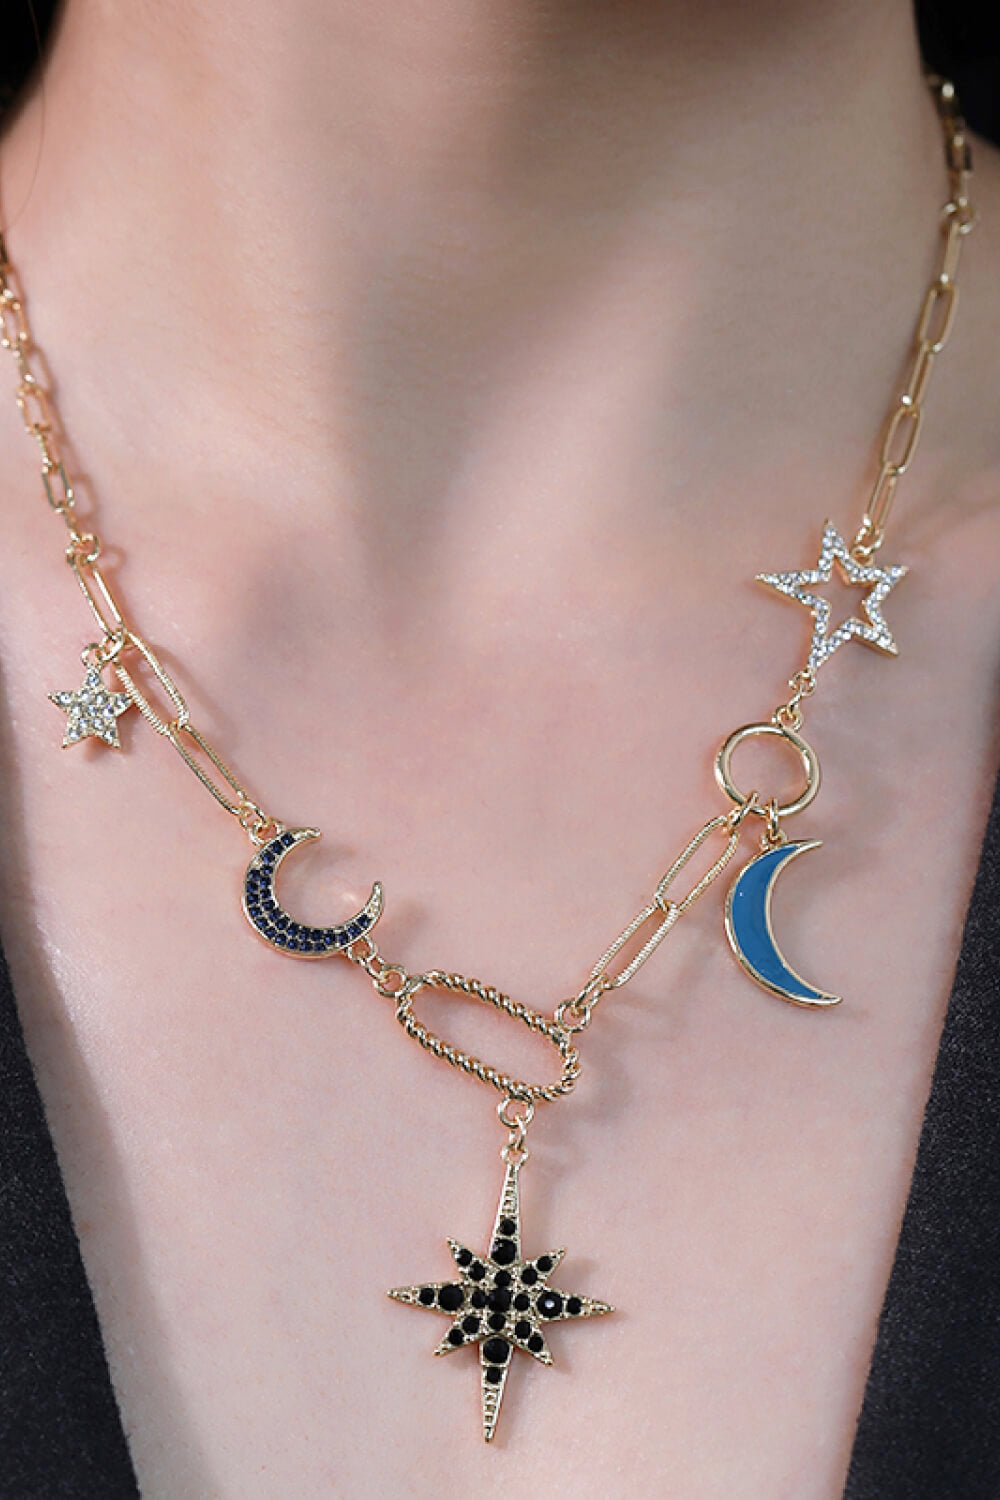 5-Piece Wholesale Star and Moon Rhinestone Alloy Necklace